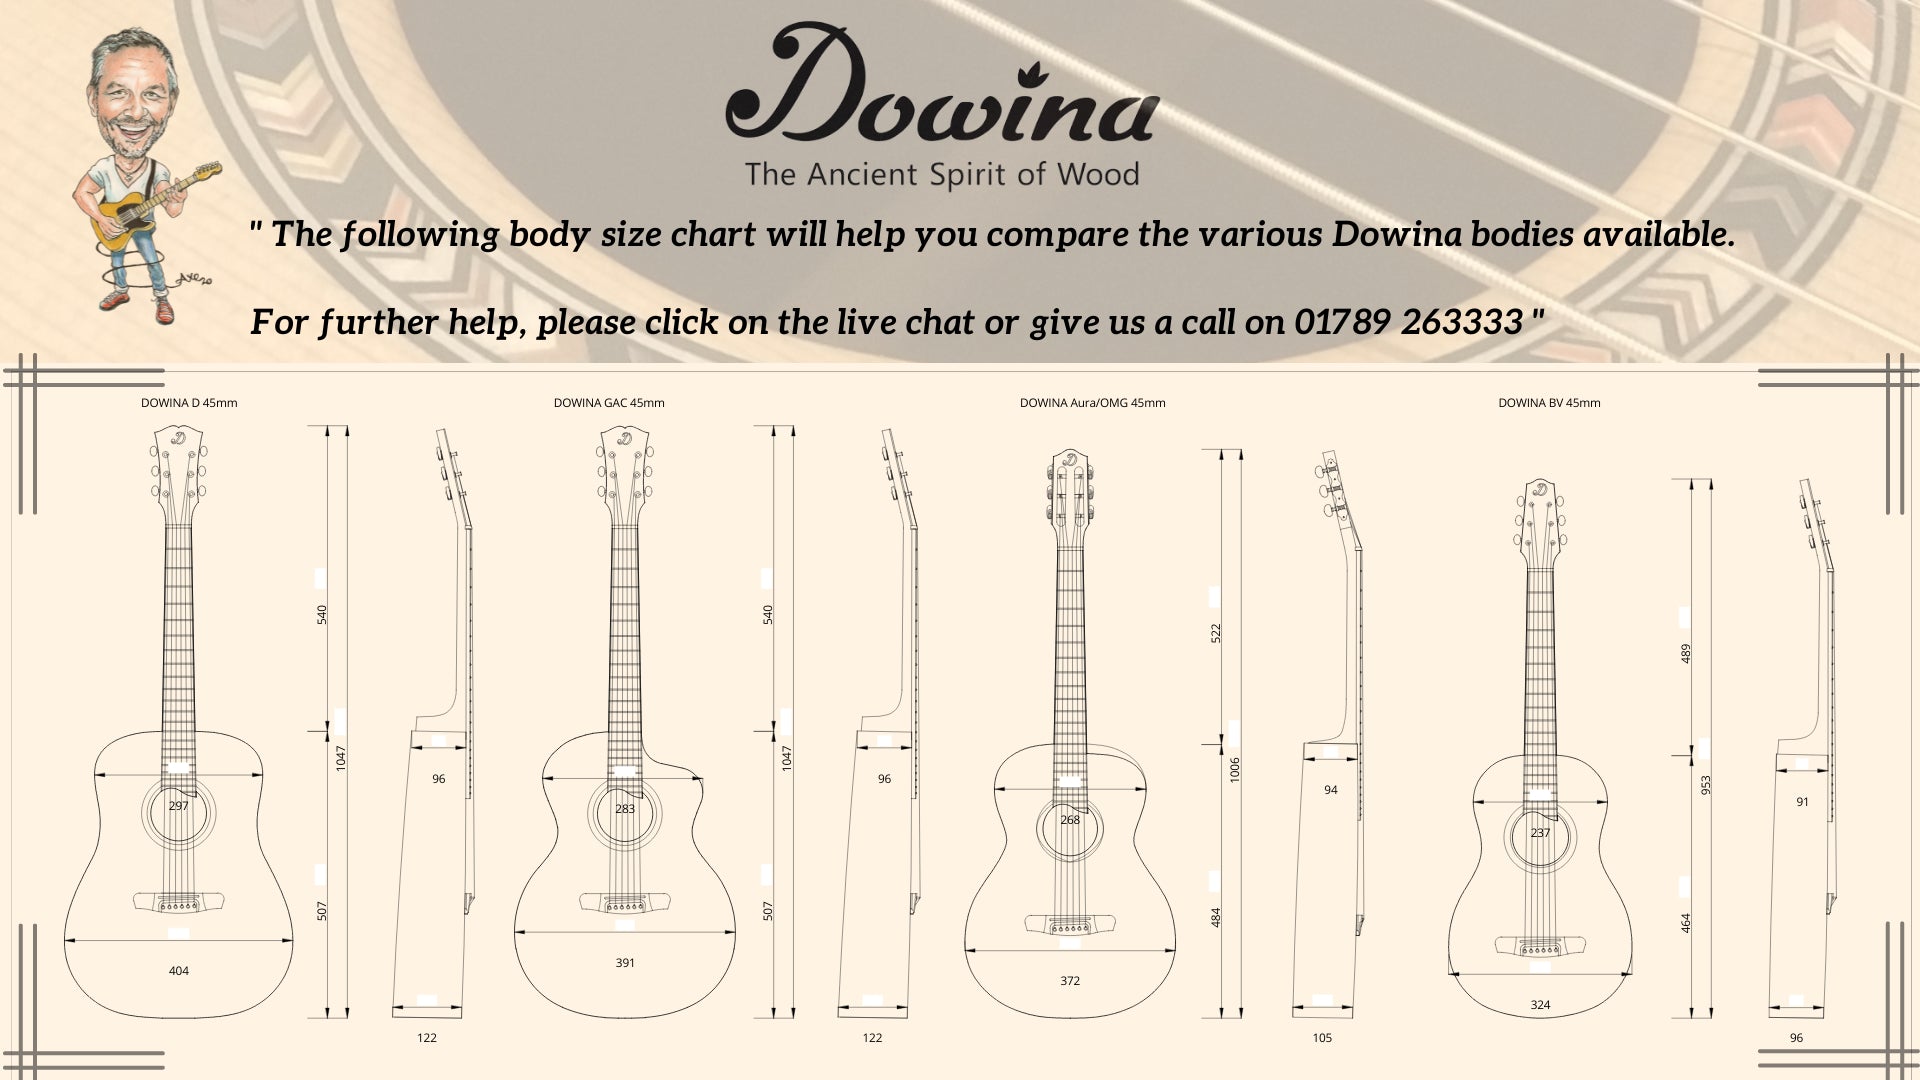 Dowina Pure Hyvibe GAC, Acoustic Guitar for sale at Richards Guitars.